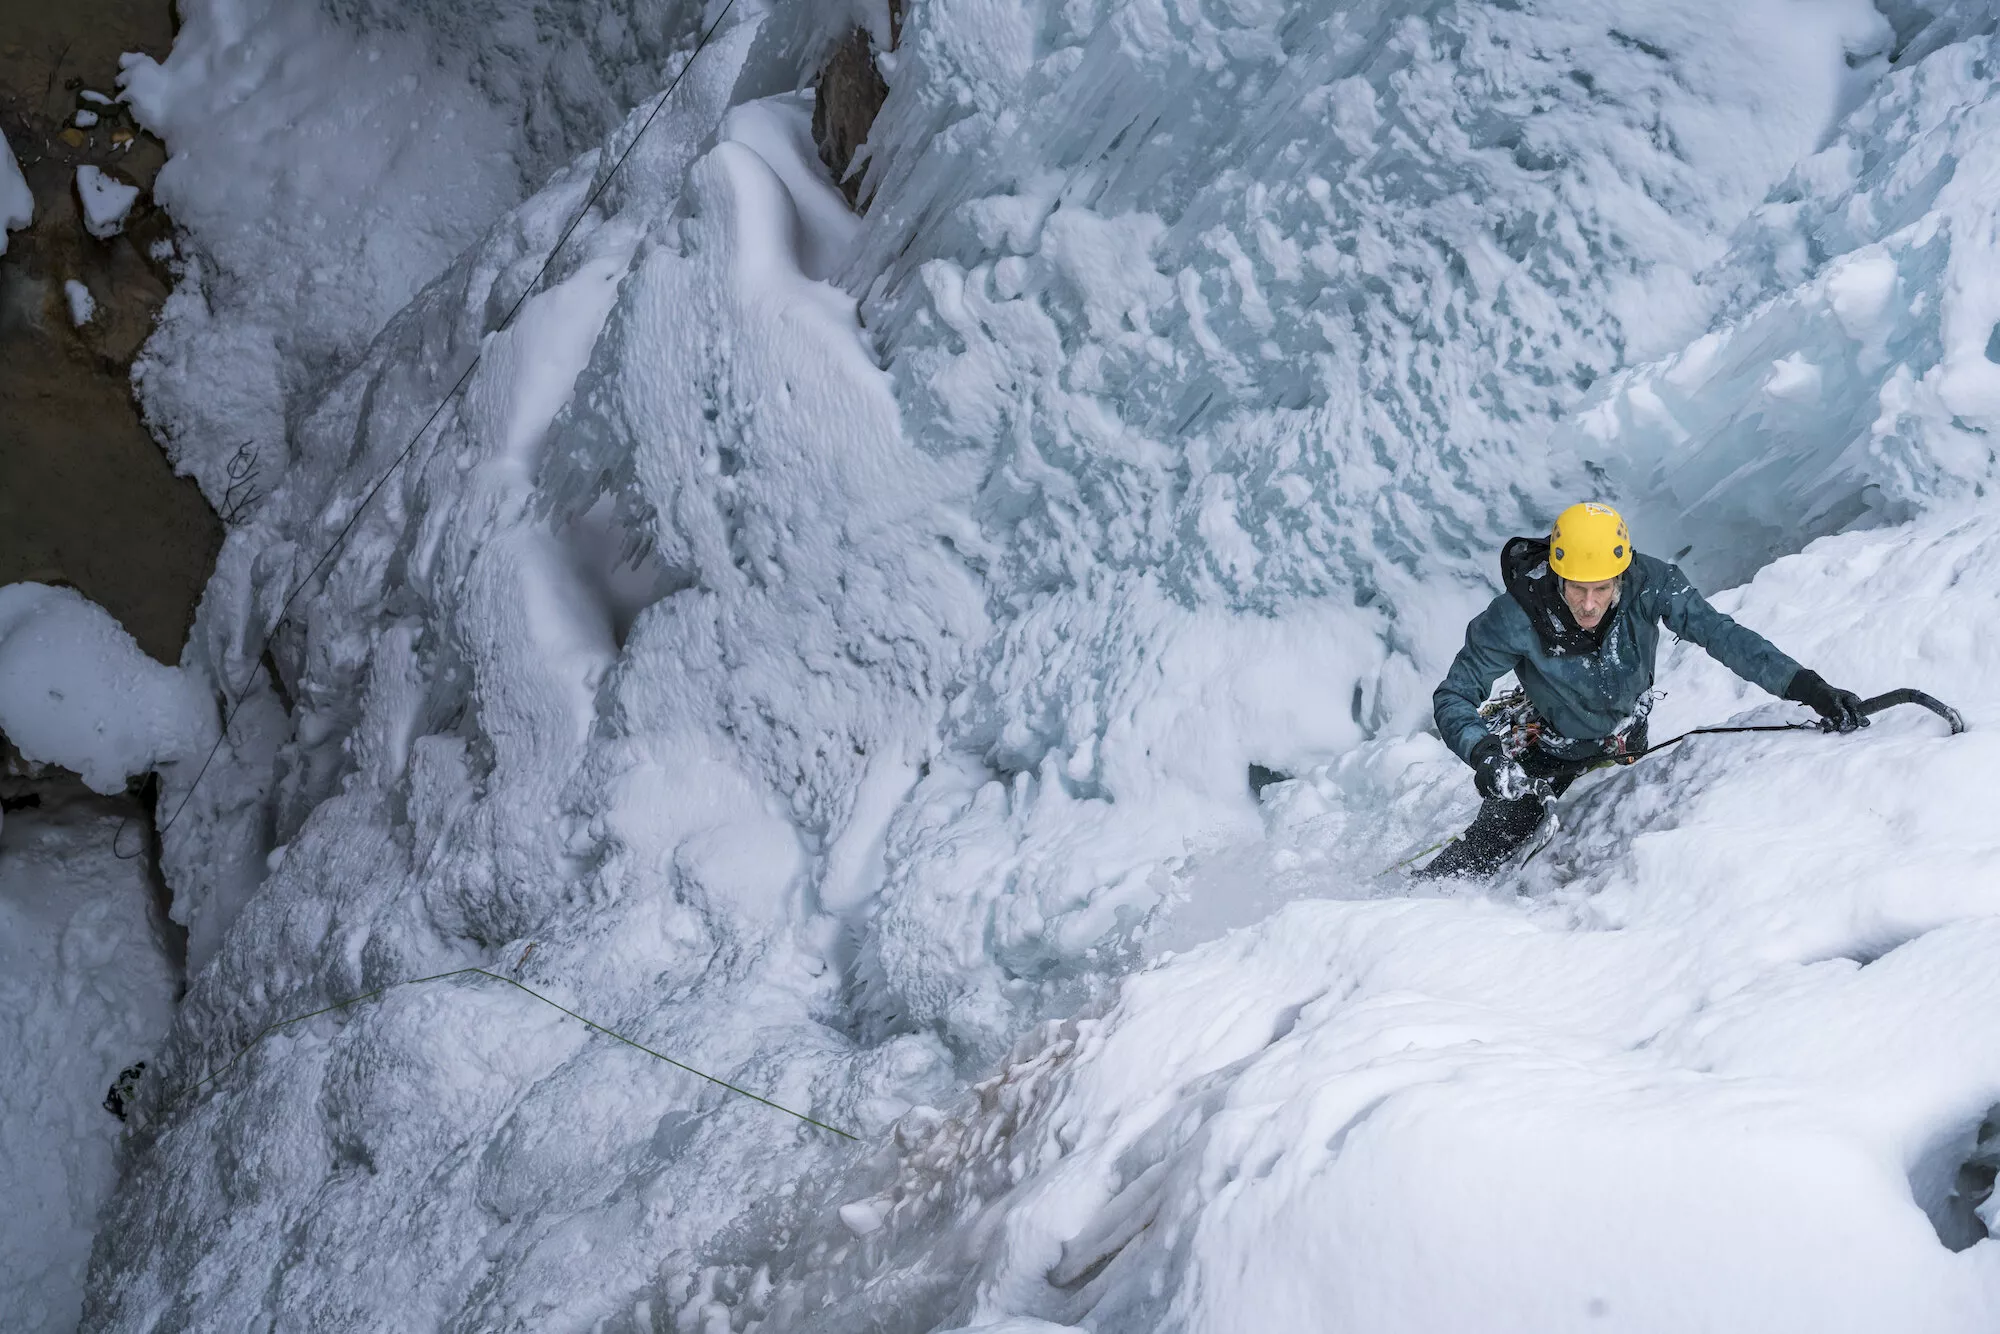 Ouray Ice Park in USA, North America | Ice Climbing - Rated 4